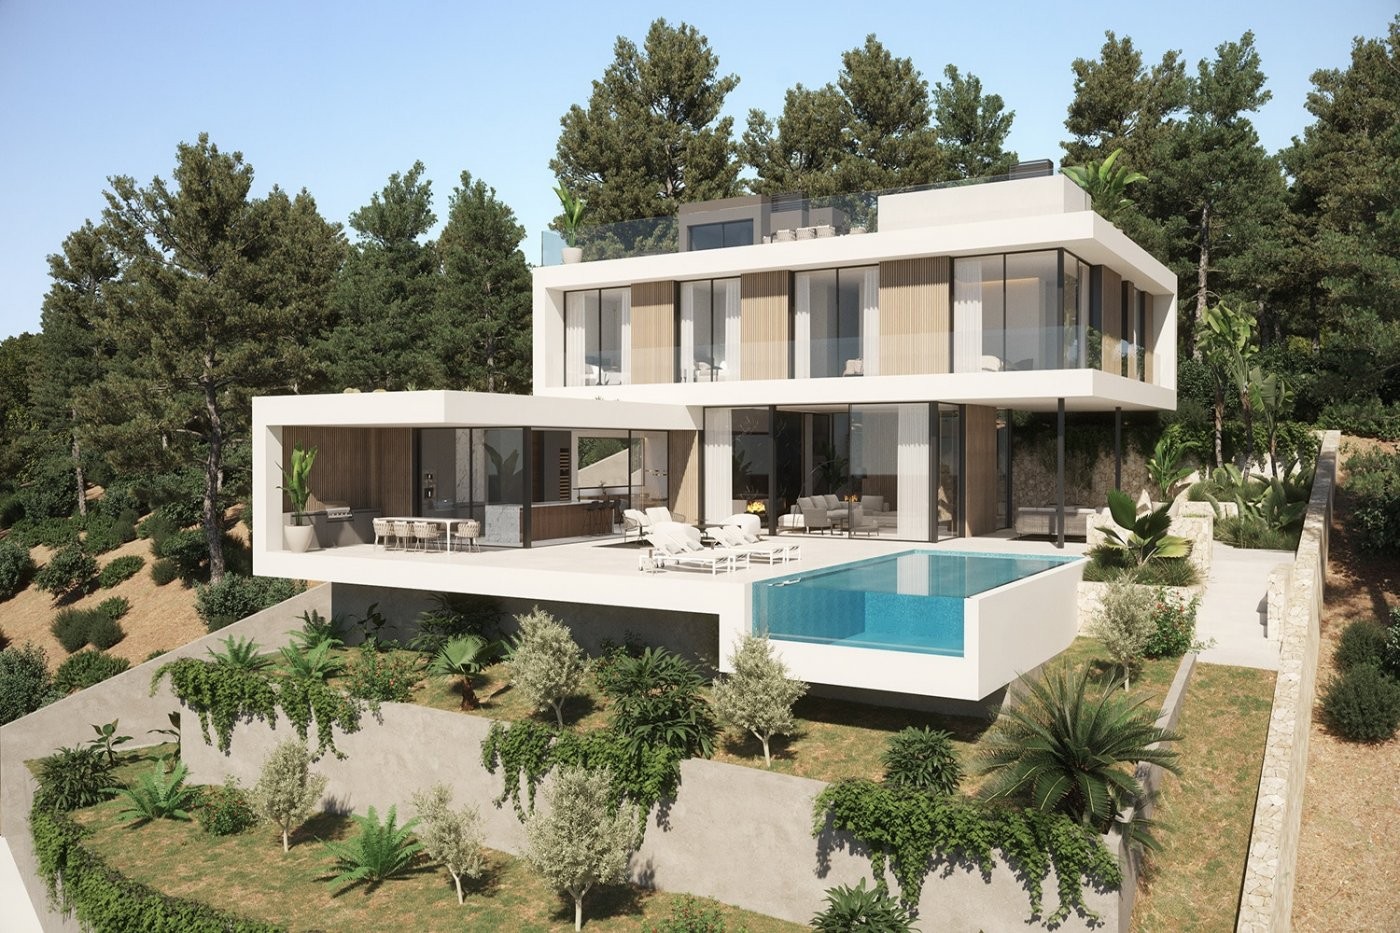 Villa in innovative modern design with large terrace areas and sea views in Cala Llamp